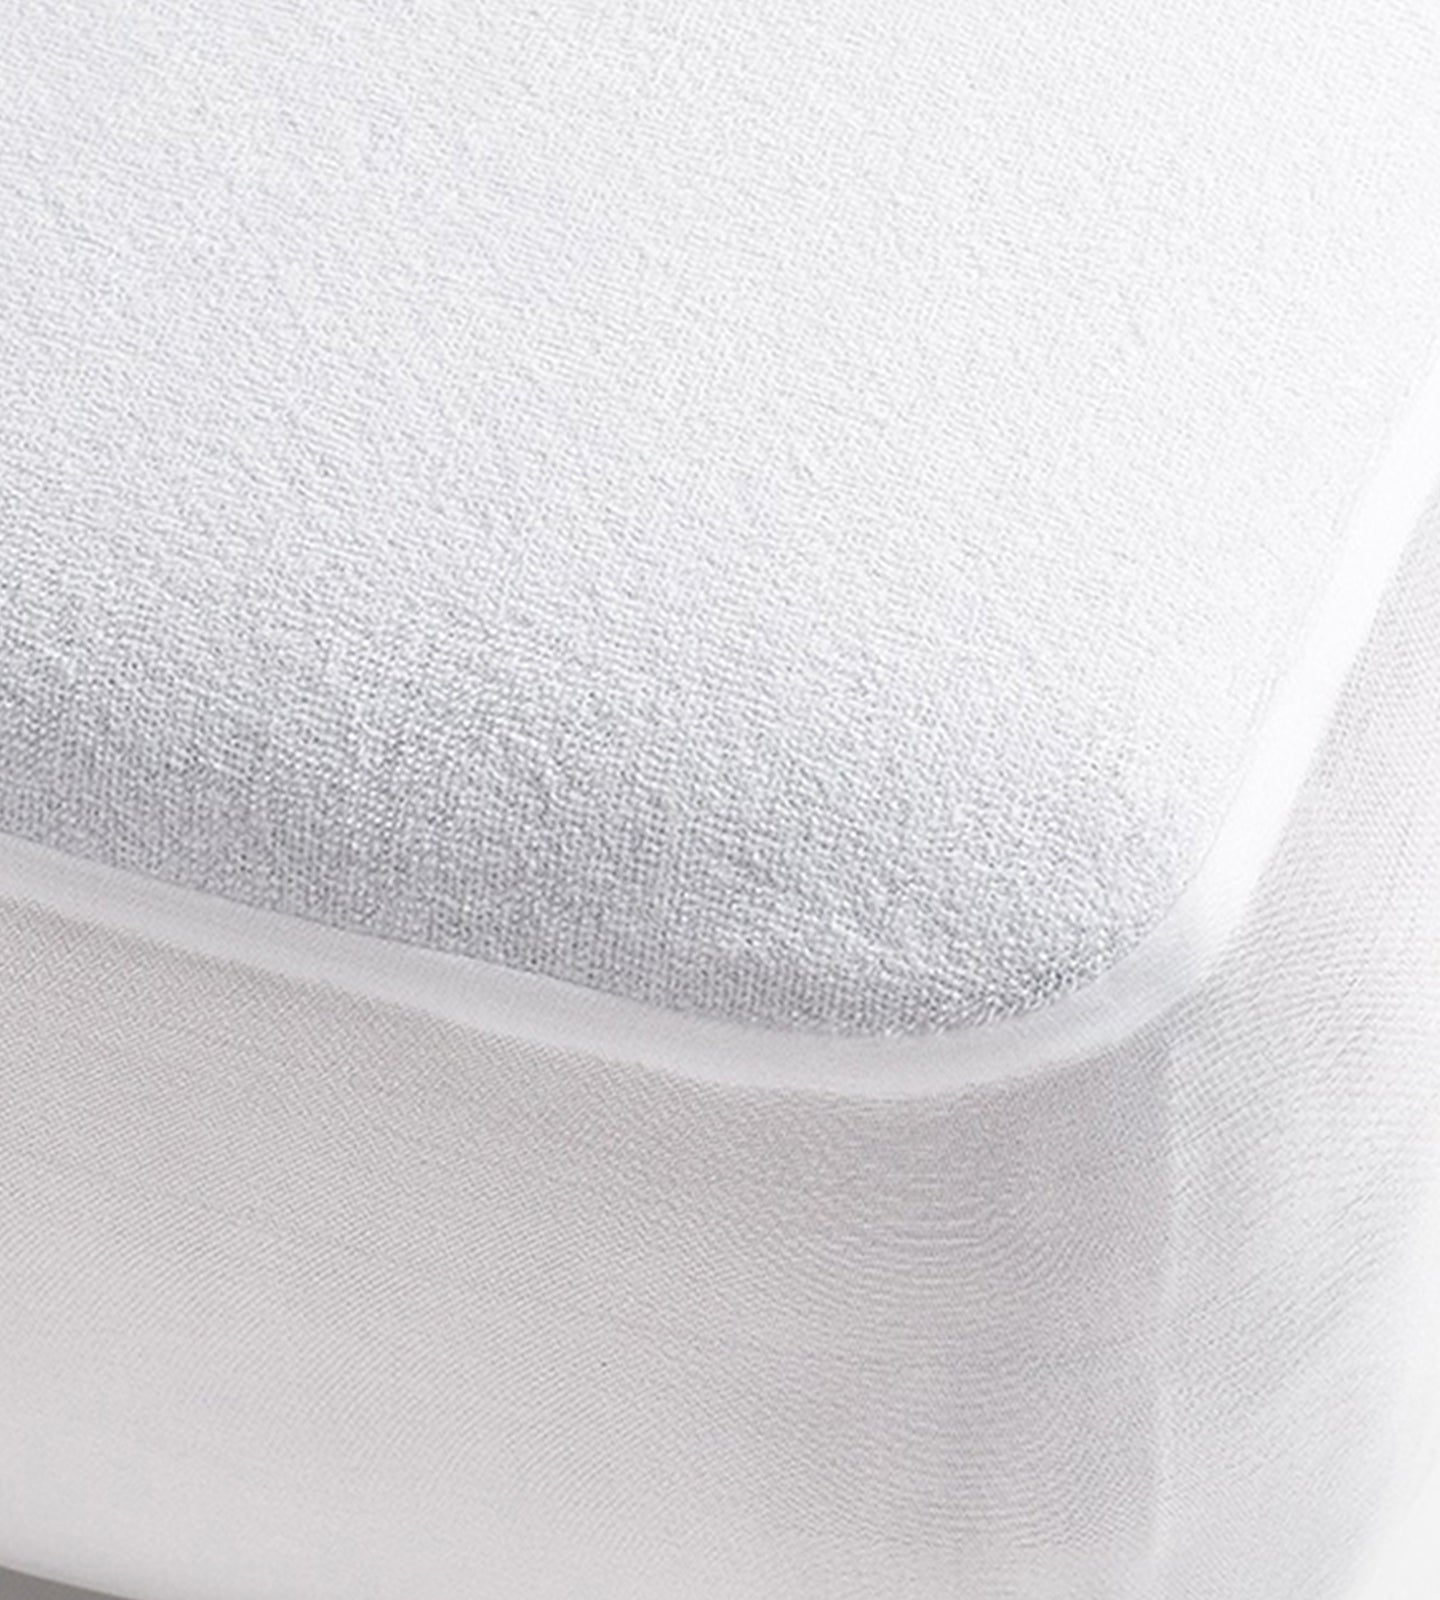 Mattress Protector Towelling - Brolly Sheets AU